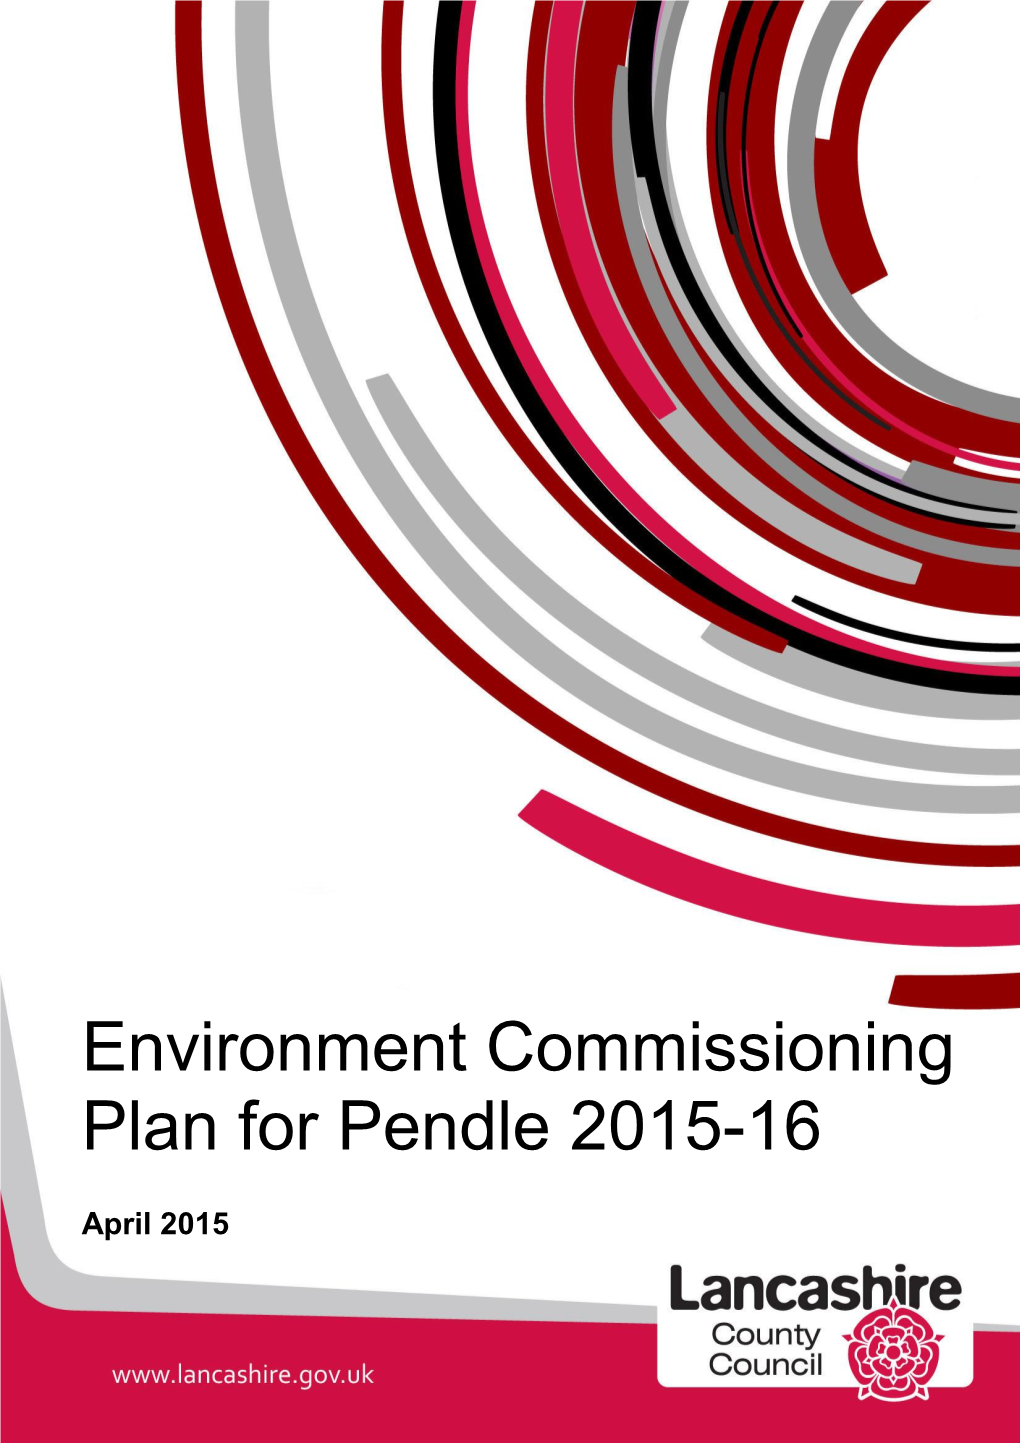 Environment Commissioning Plan for Pendle 2015-16